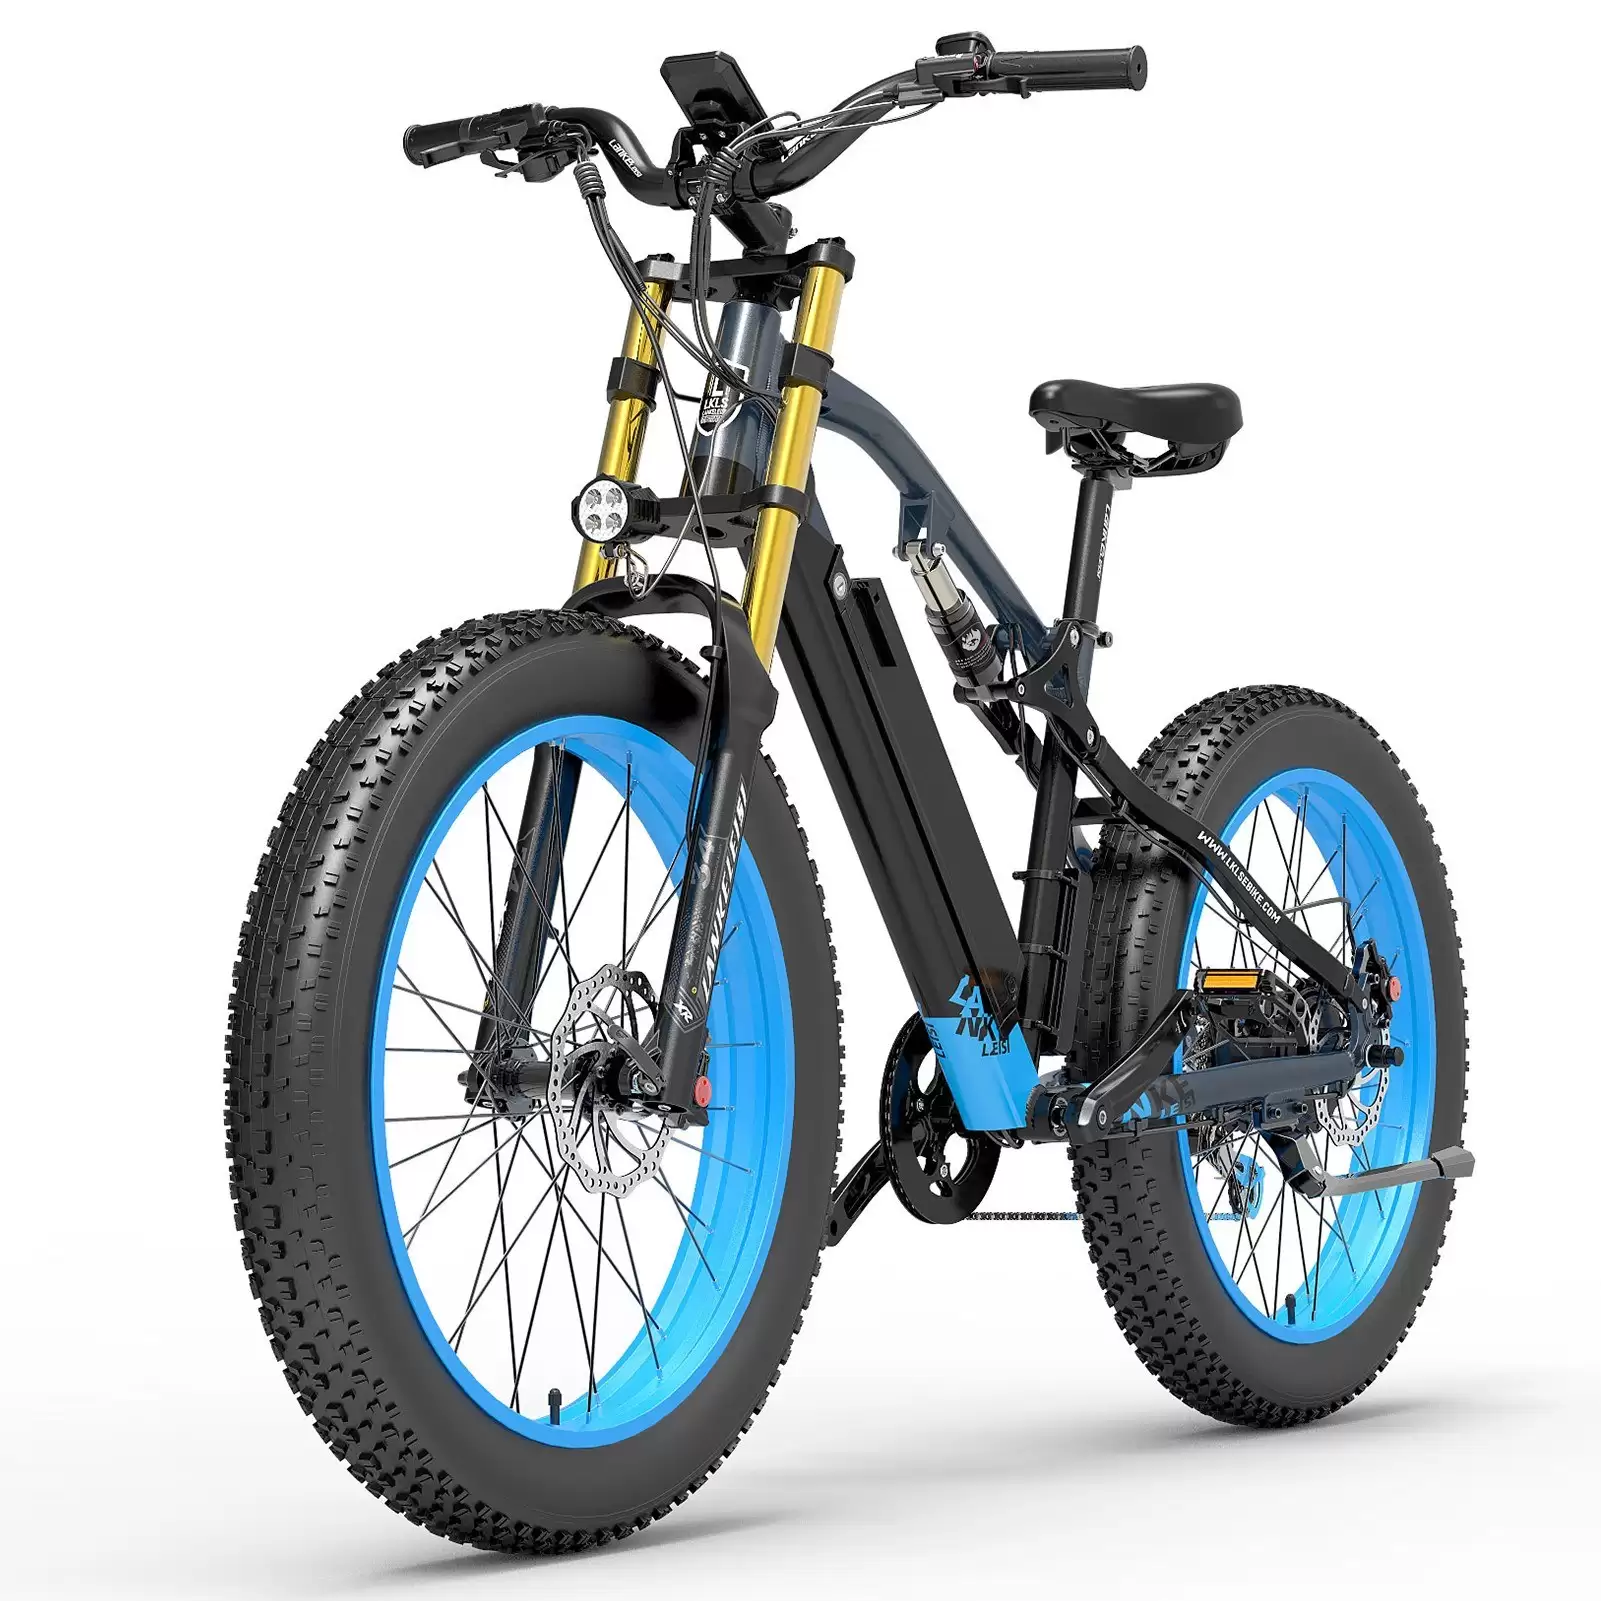 Order In Just $1629.98 Lankeleisi Rv700 48v 1000w Electric Bike 16ah Battery Max Speed 42km/h Using This Tomtop Discount Code